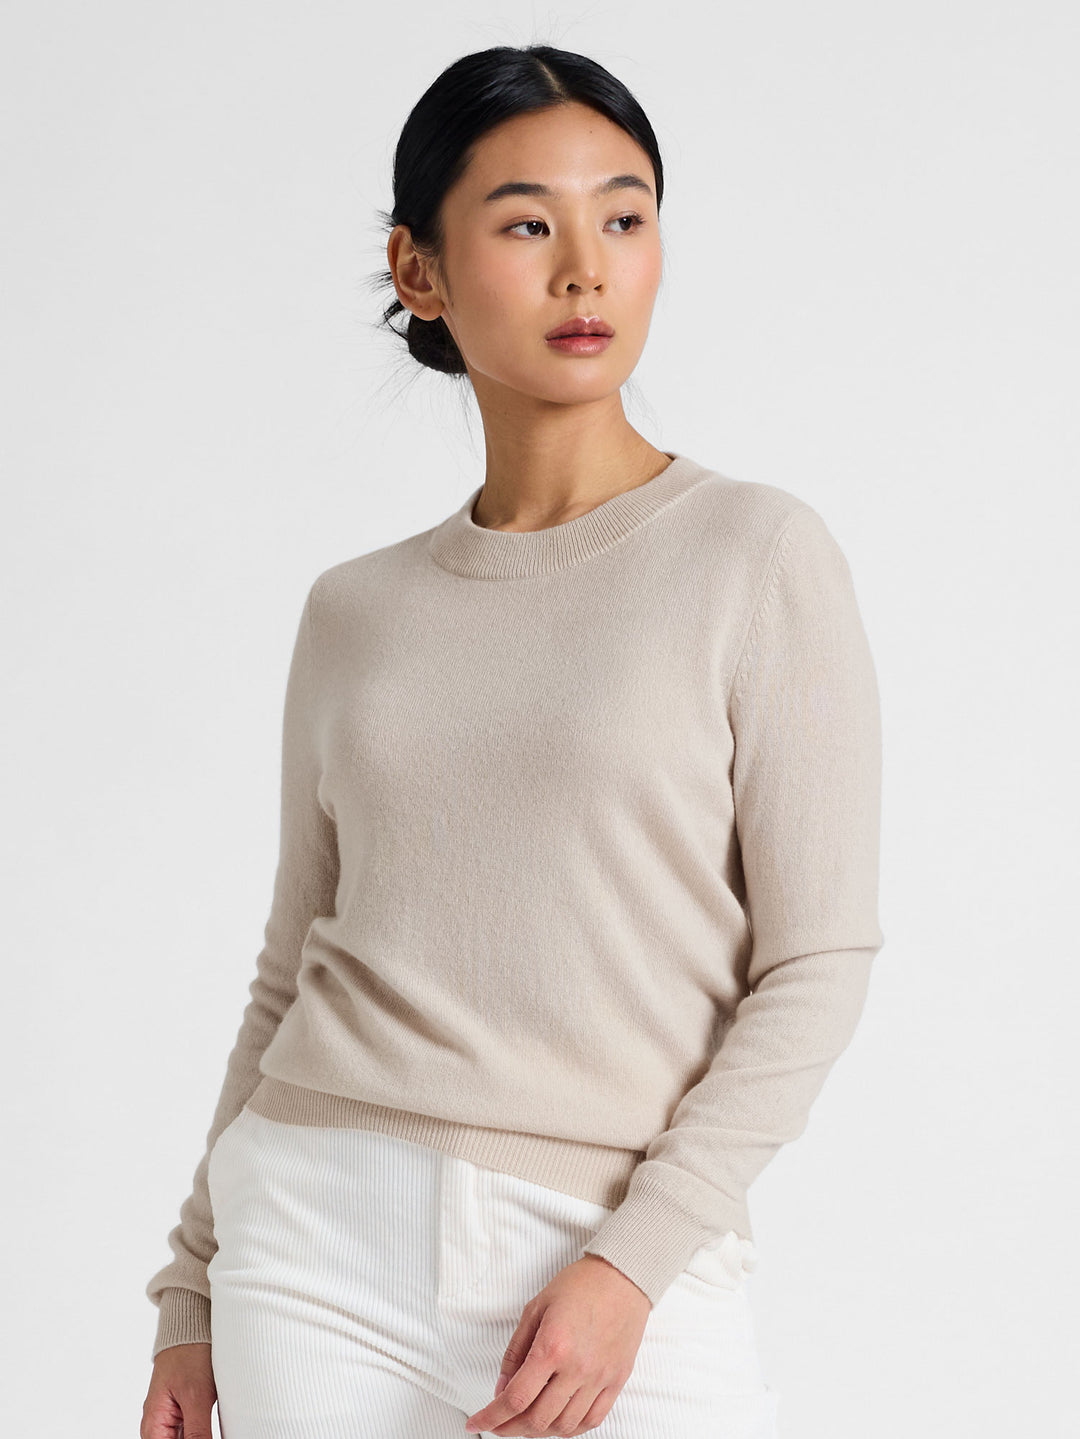 Cashmere sweater "Thora" in 100% pure cashmere. Long sleeves, round neck. Scandinavian design by Kashmina. Color: Cream.